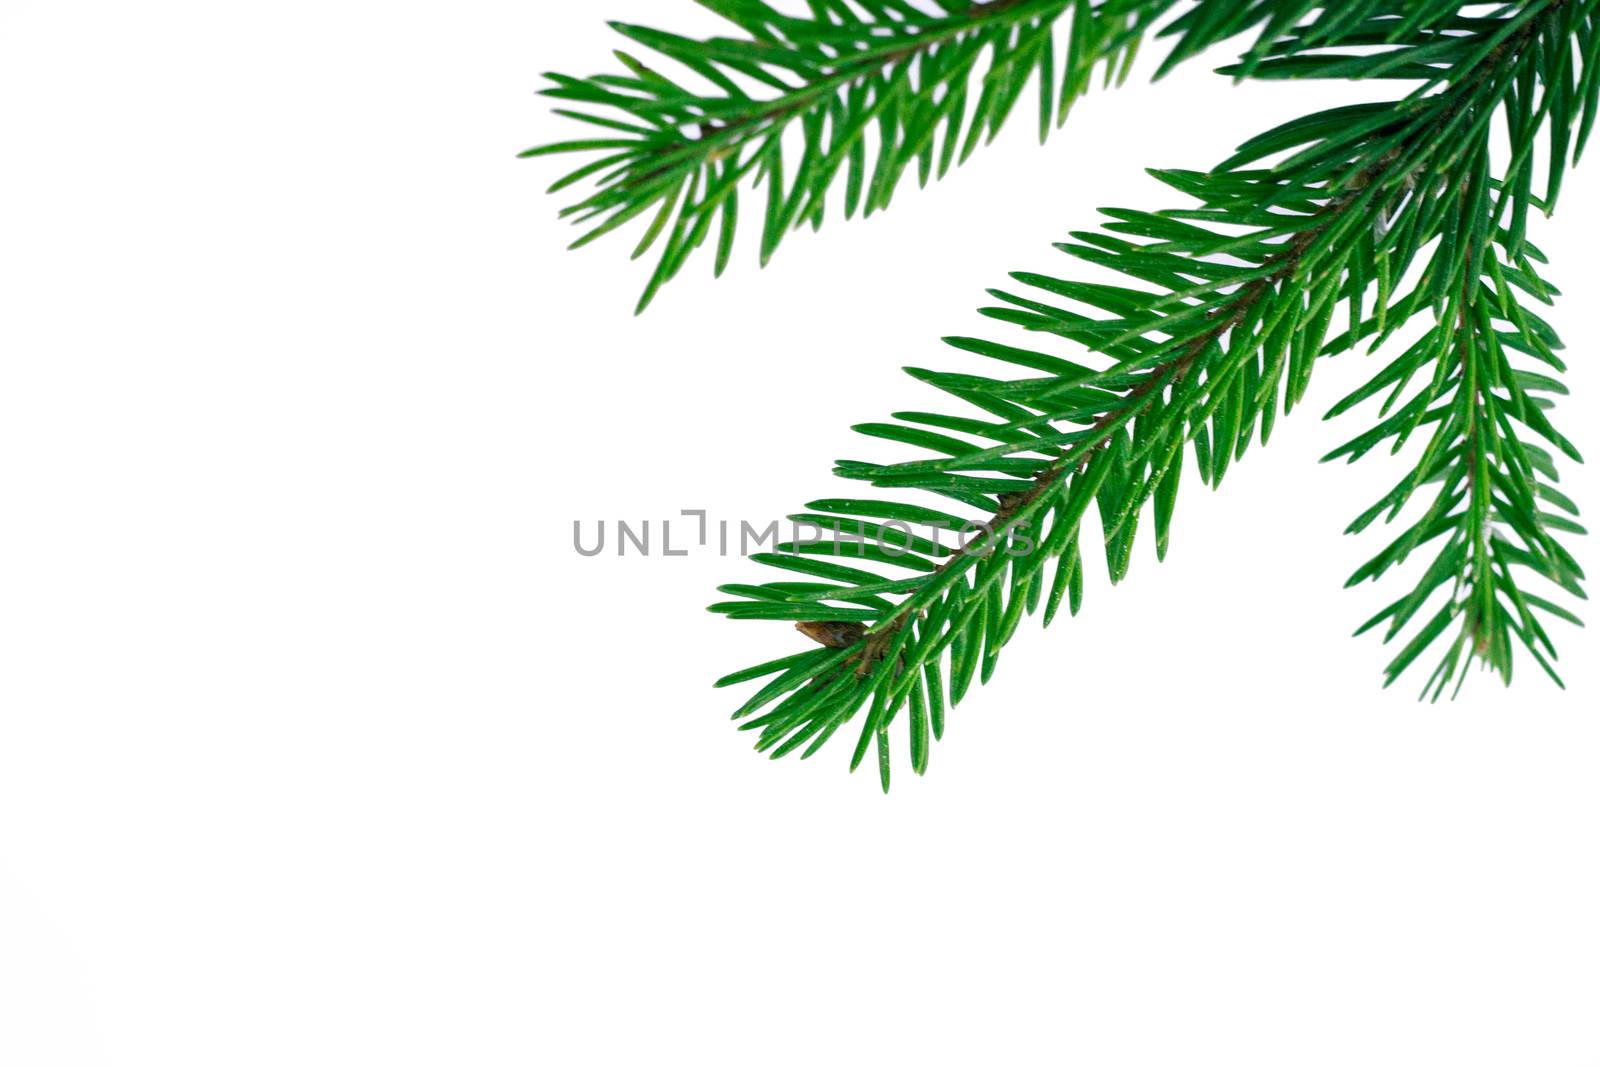 New year white copyspace background, green fir tree branches fra by VeraVerano